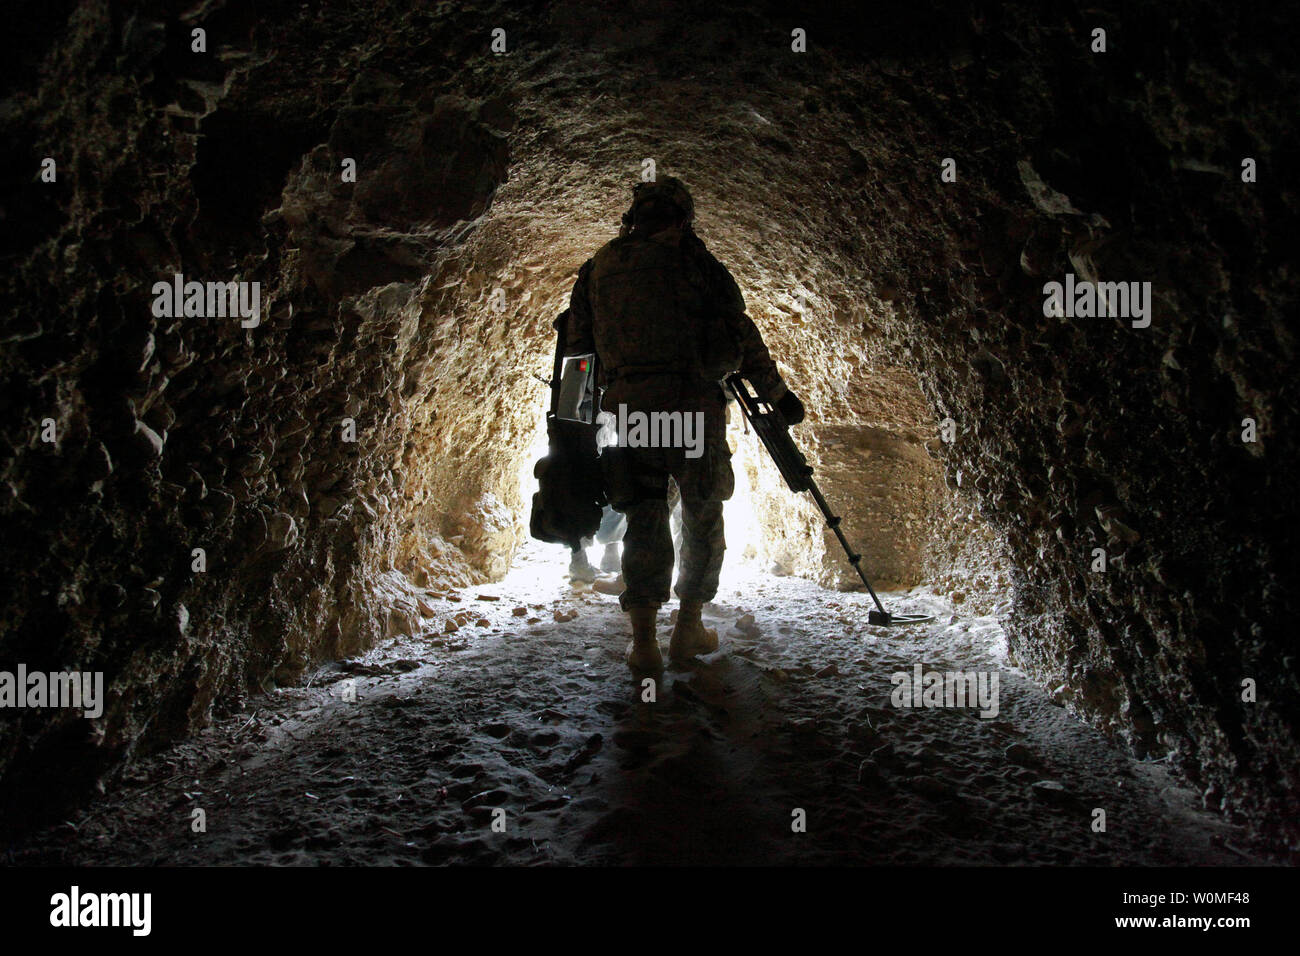 U.S. Army Spc. Jonathan Araiza uses a mine detector during a mission with Afghan national police to search for enemy weapons caches near Shah Wali Zarat, Khowst province, Afghanistan, on July 24, 2009. UPI/Andrew Smith/U.S. Army Stock Photo